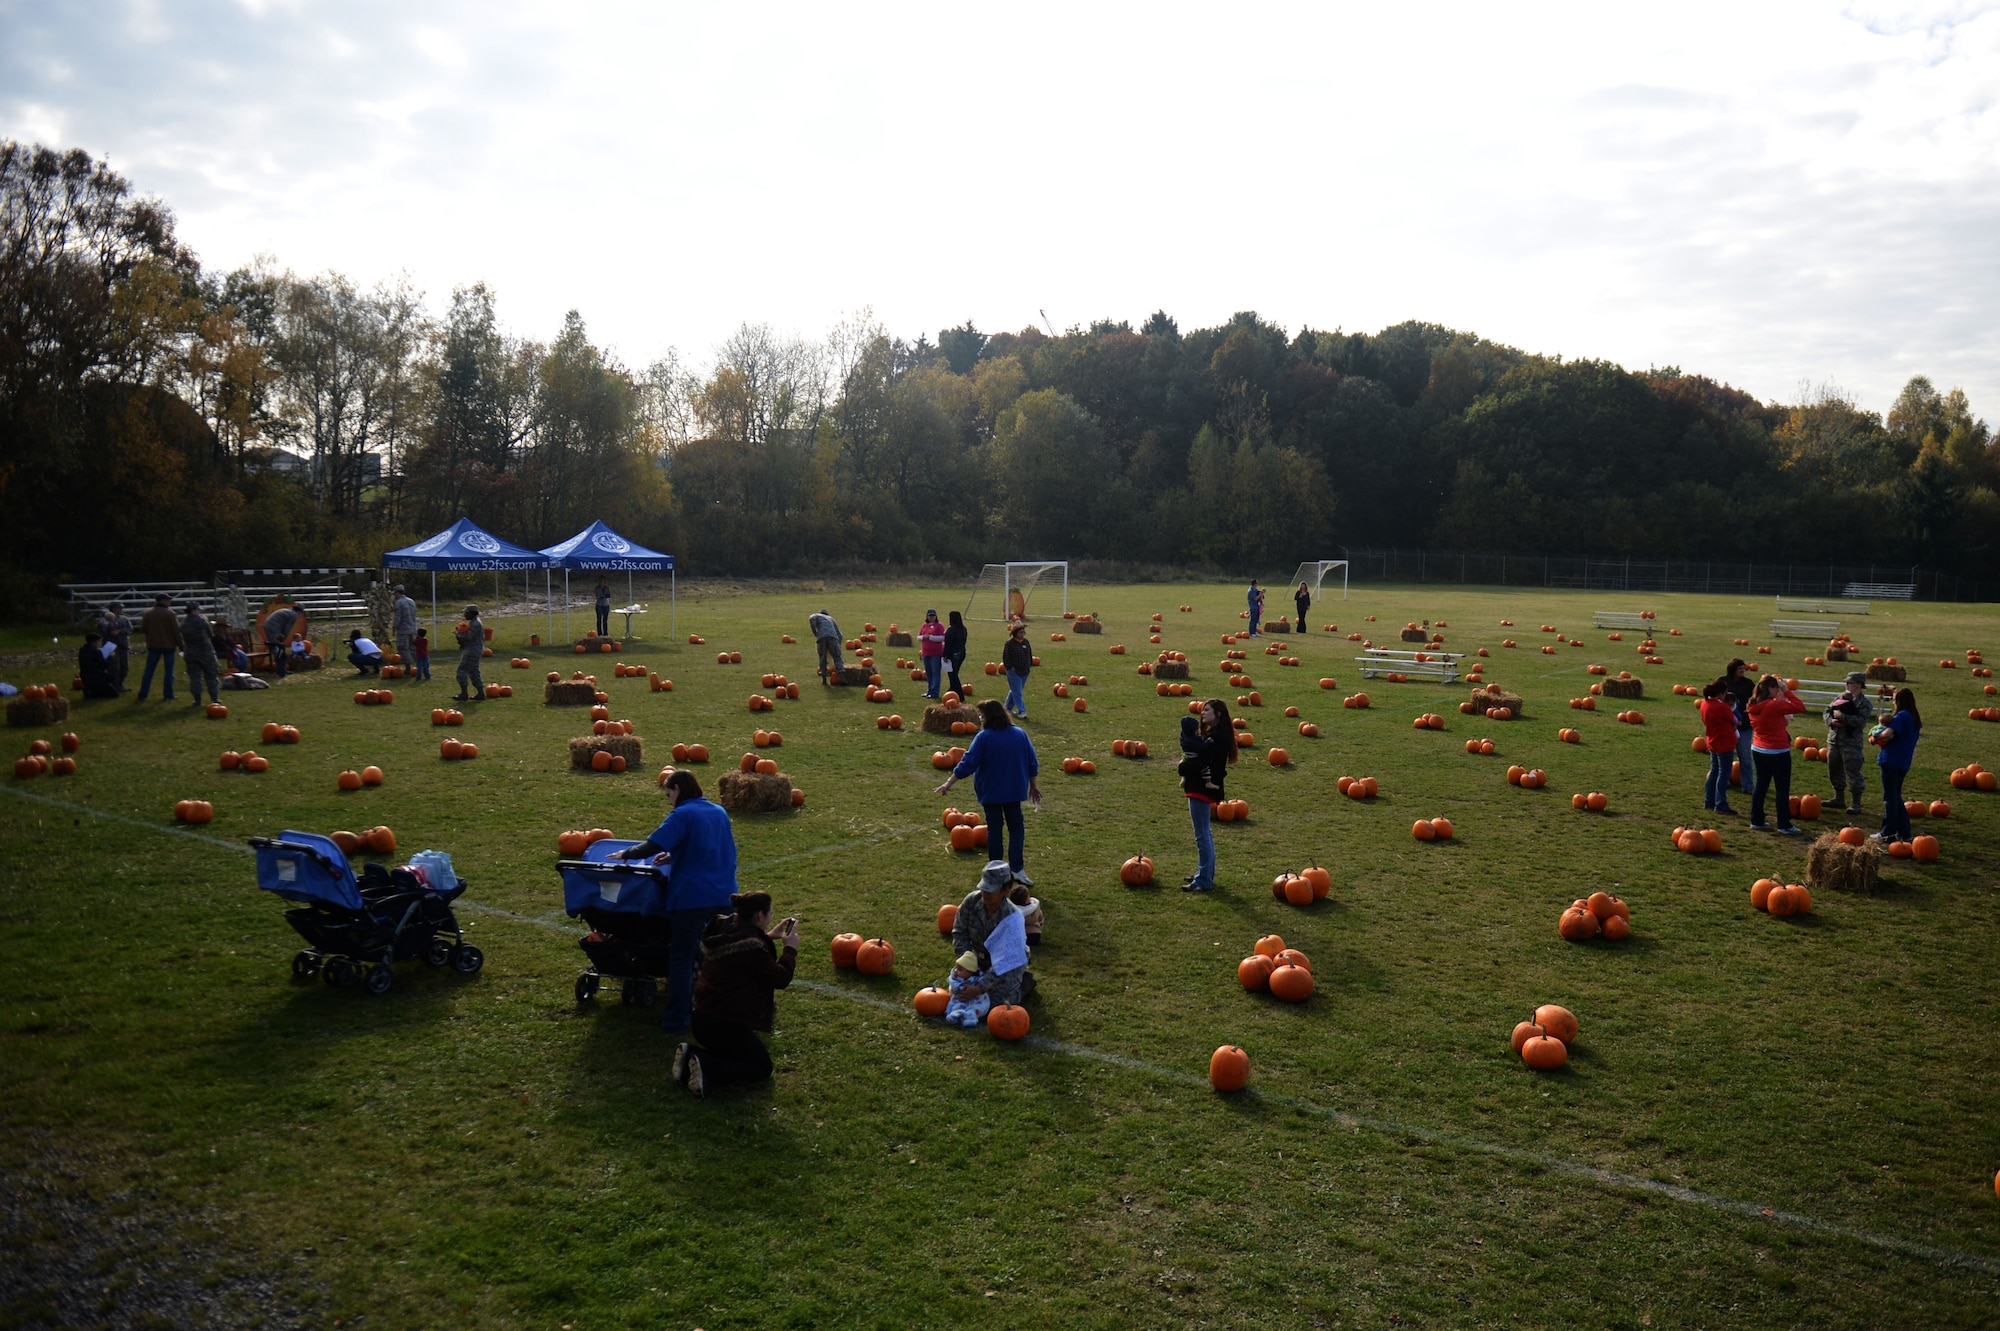 SPANGDAHLEM AIR BASE, Germany – Families search for the perfect pumpkin in a soccer field near the child development center during a pumpkin patch event Oct. 25, 2012.  Bringing holiday traditions on base is just one of the ways the 52nd Force Support Squadron Airman and Family Services Flight support the 52nd Fighter Wing community. (U.S. Air Force photo by Airman 1st Class Gustavo Castillo/Released)  